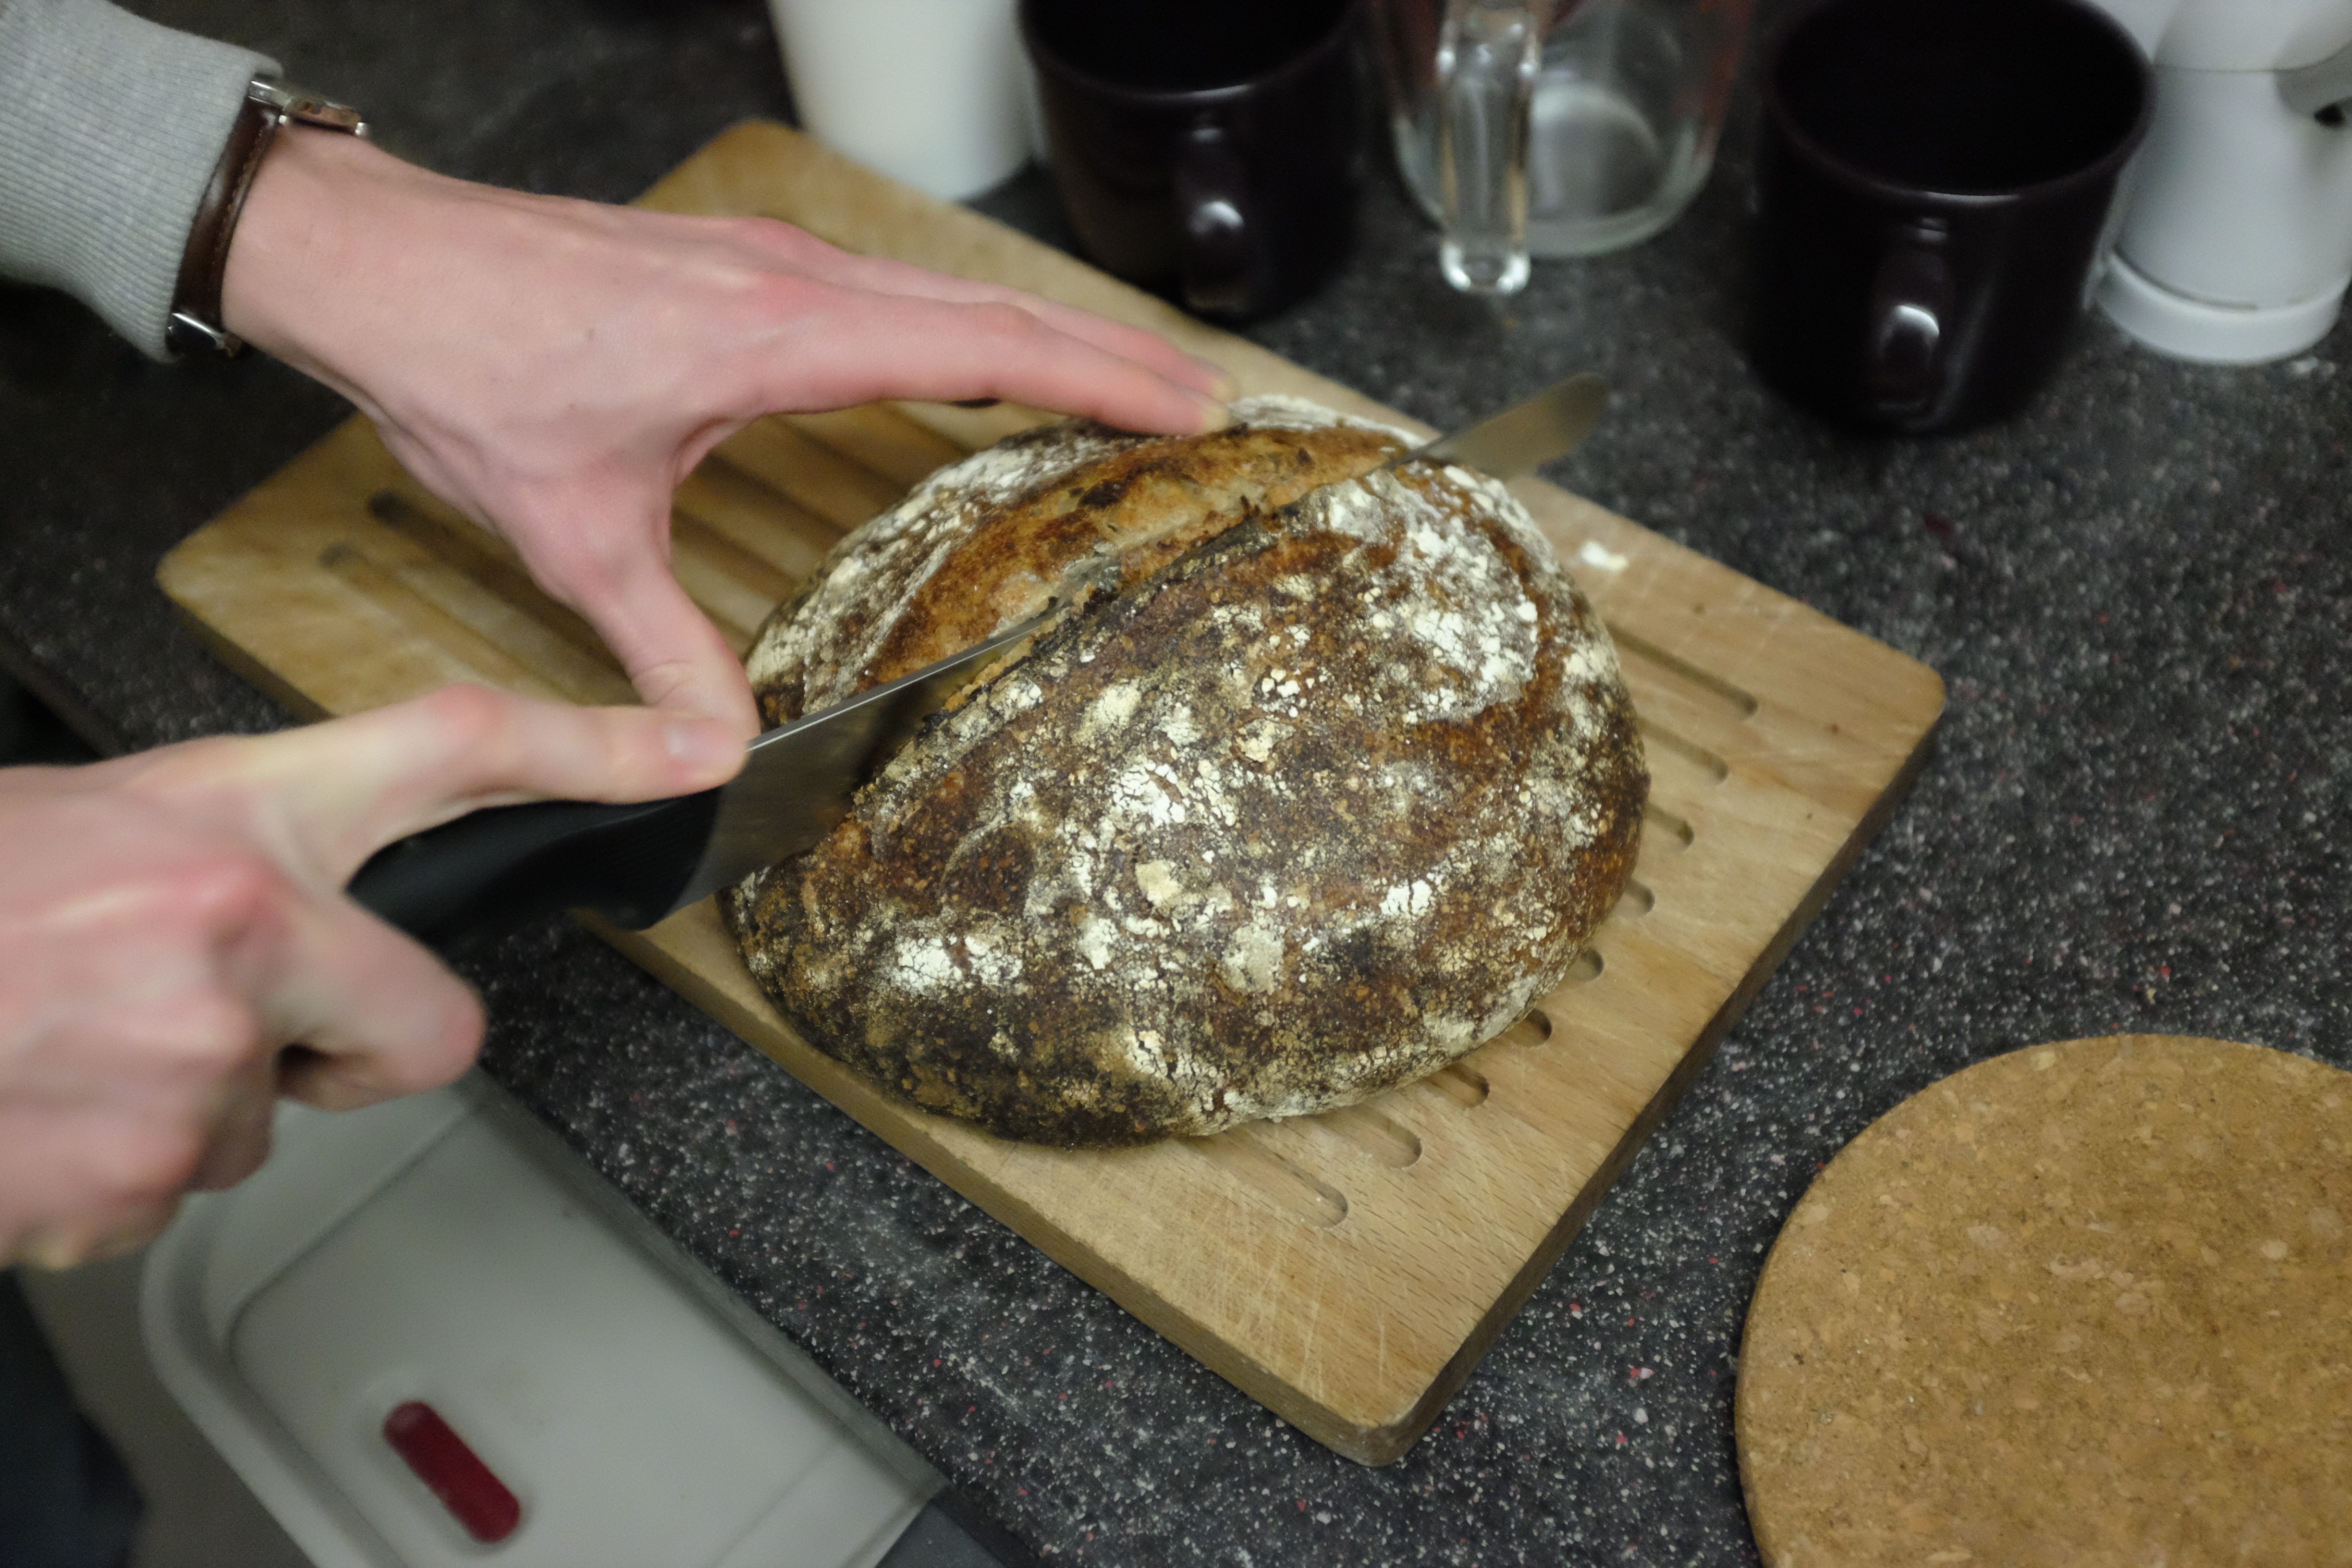 The crust of the seeded wholemeal sourdough bread